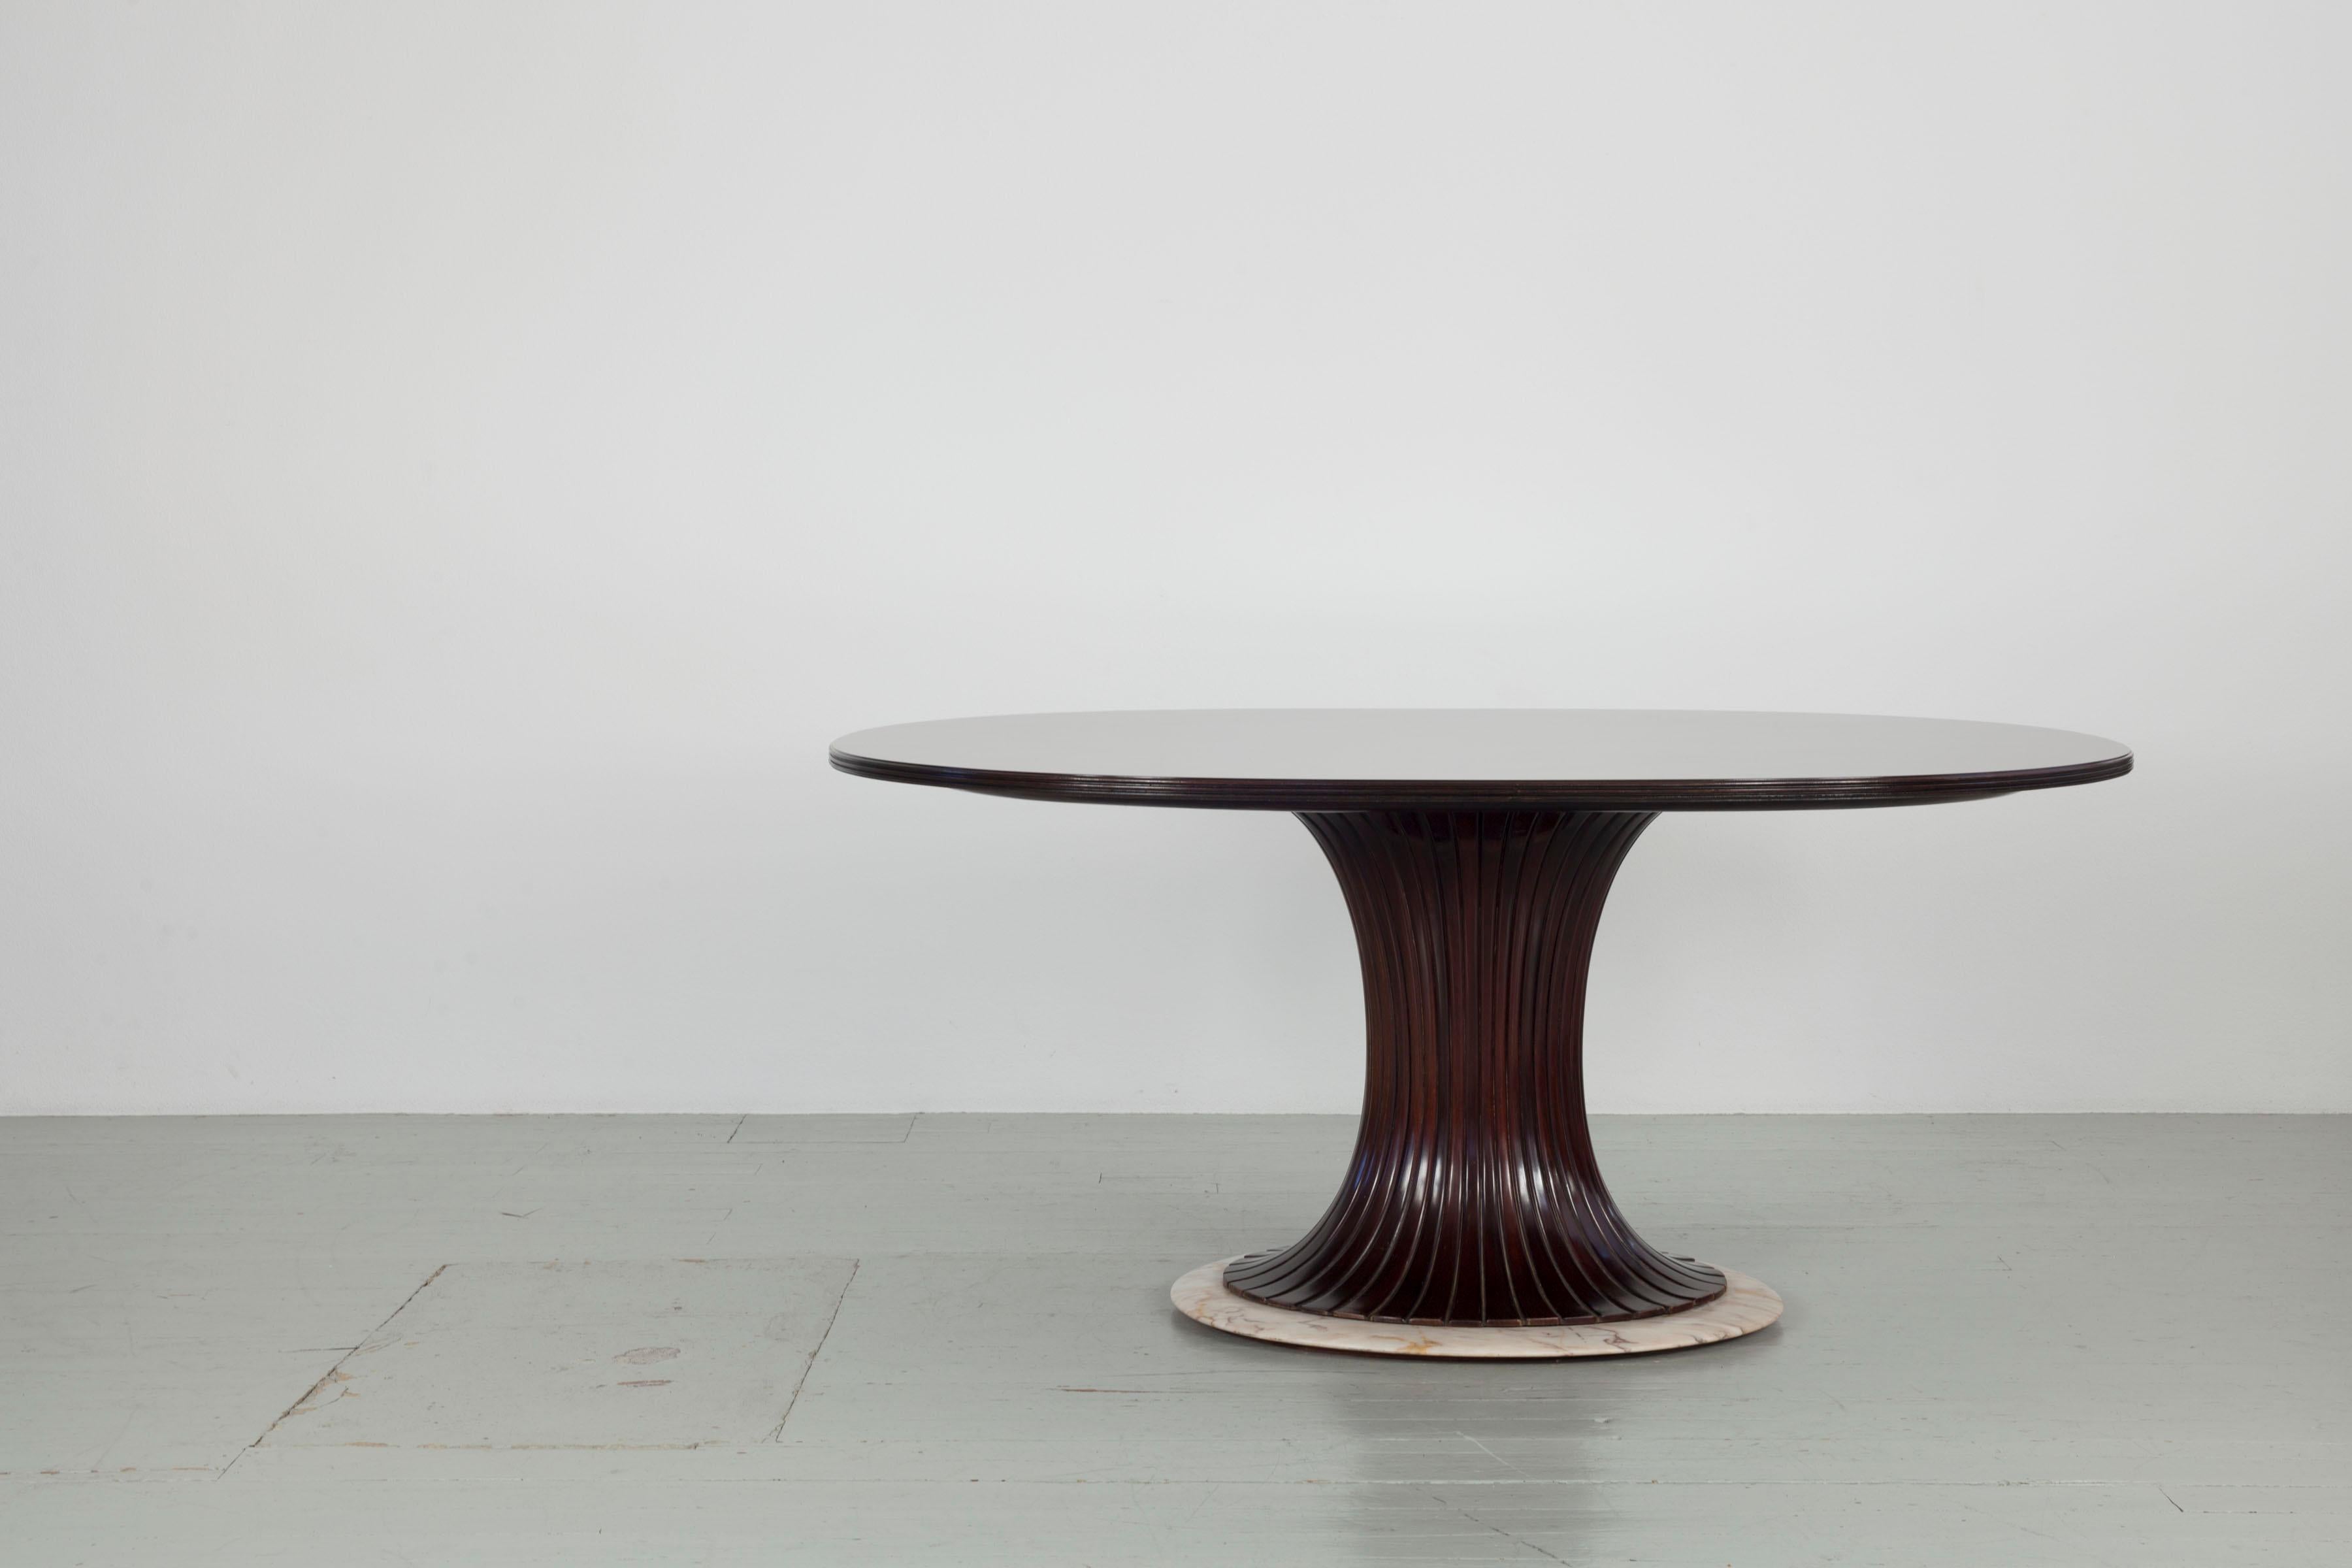 This table in the style of Vittorio Dassi was designed in the 1950s. The oval tabletop made of rosewood veneer sits on an hourglass-shaped central leg made of dark brown stained wood. The entire table is attached to a pink marble base, which creates